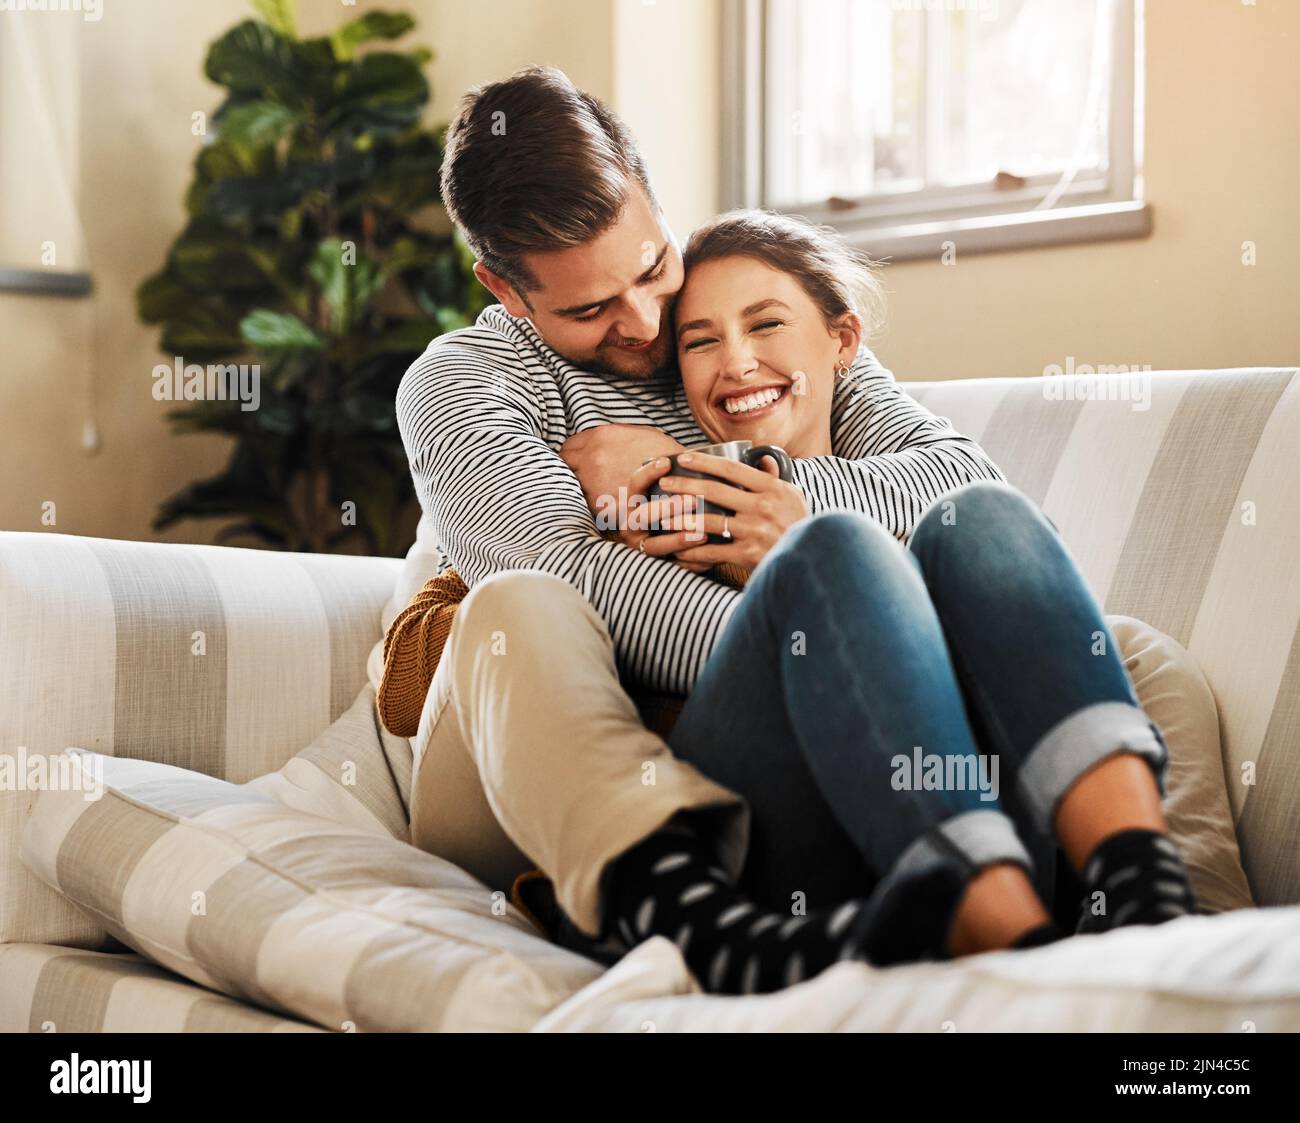 couple cuddling on couch